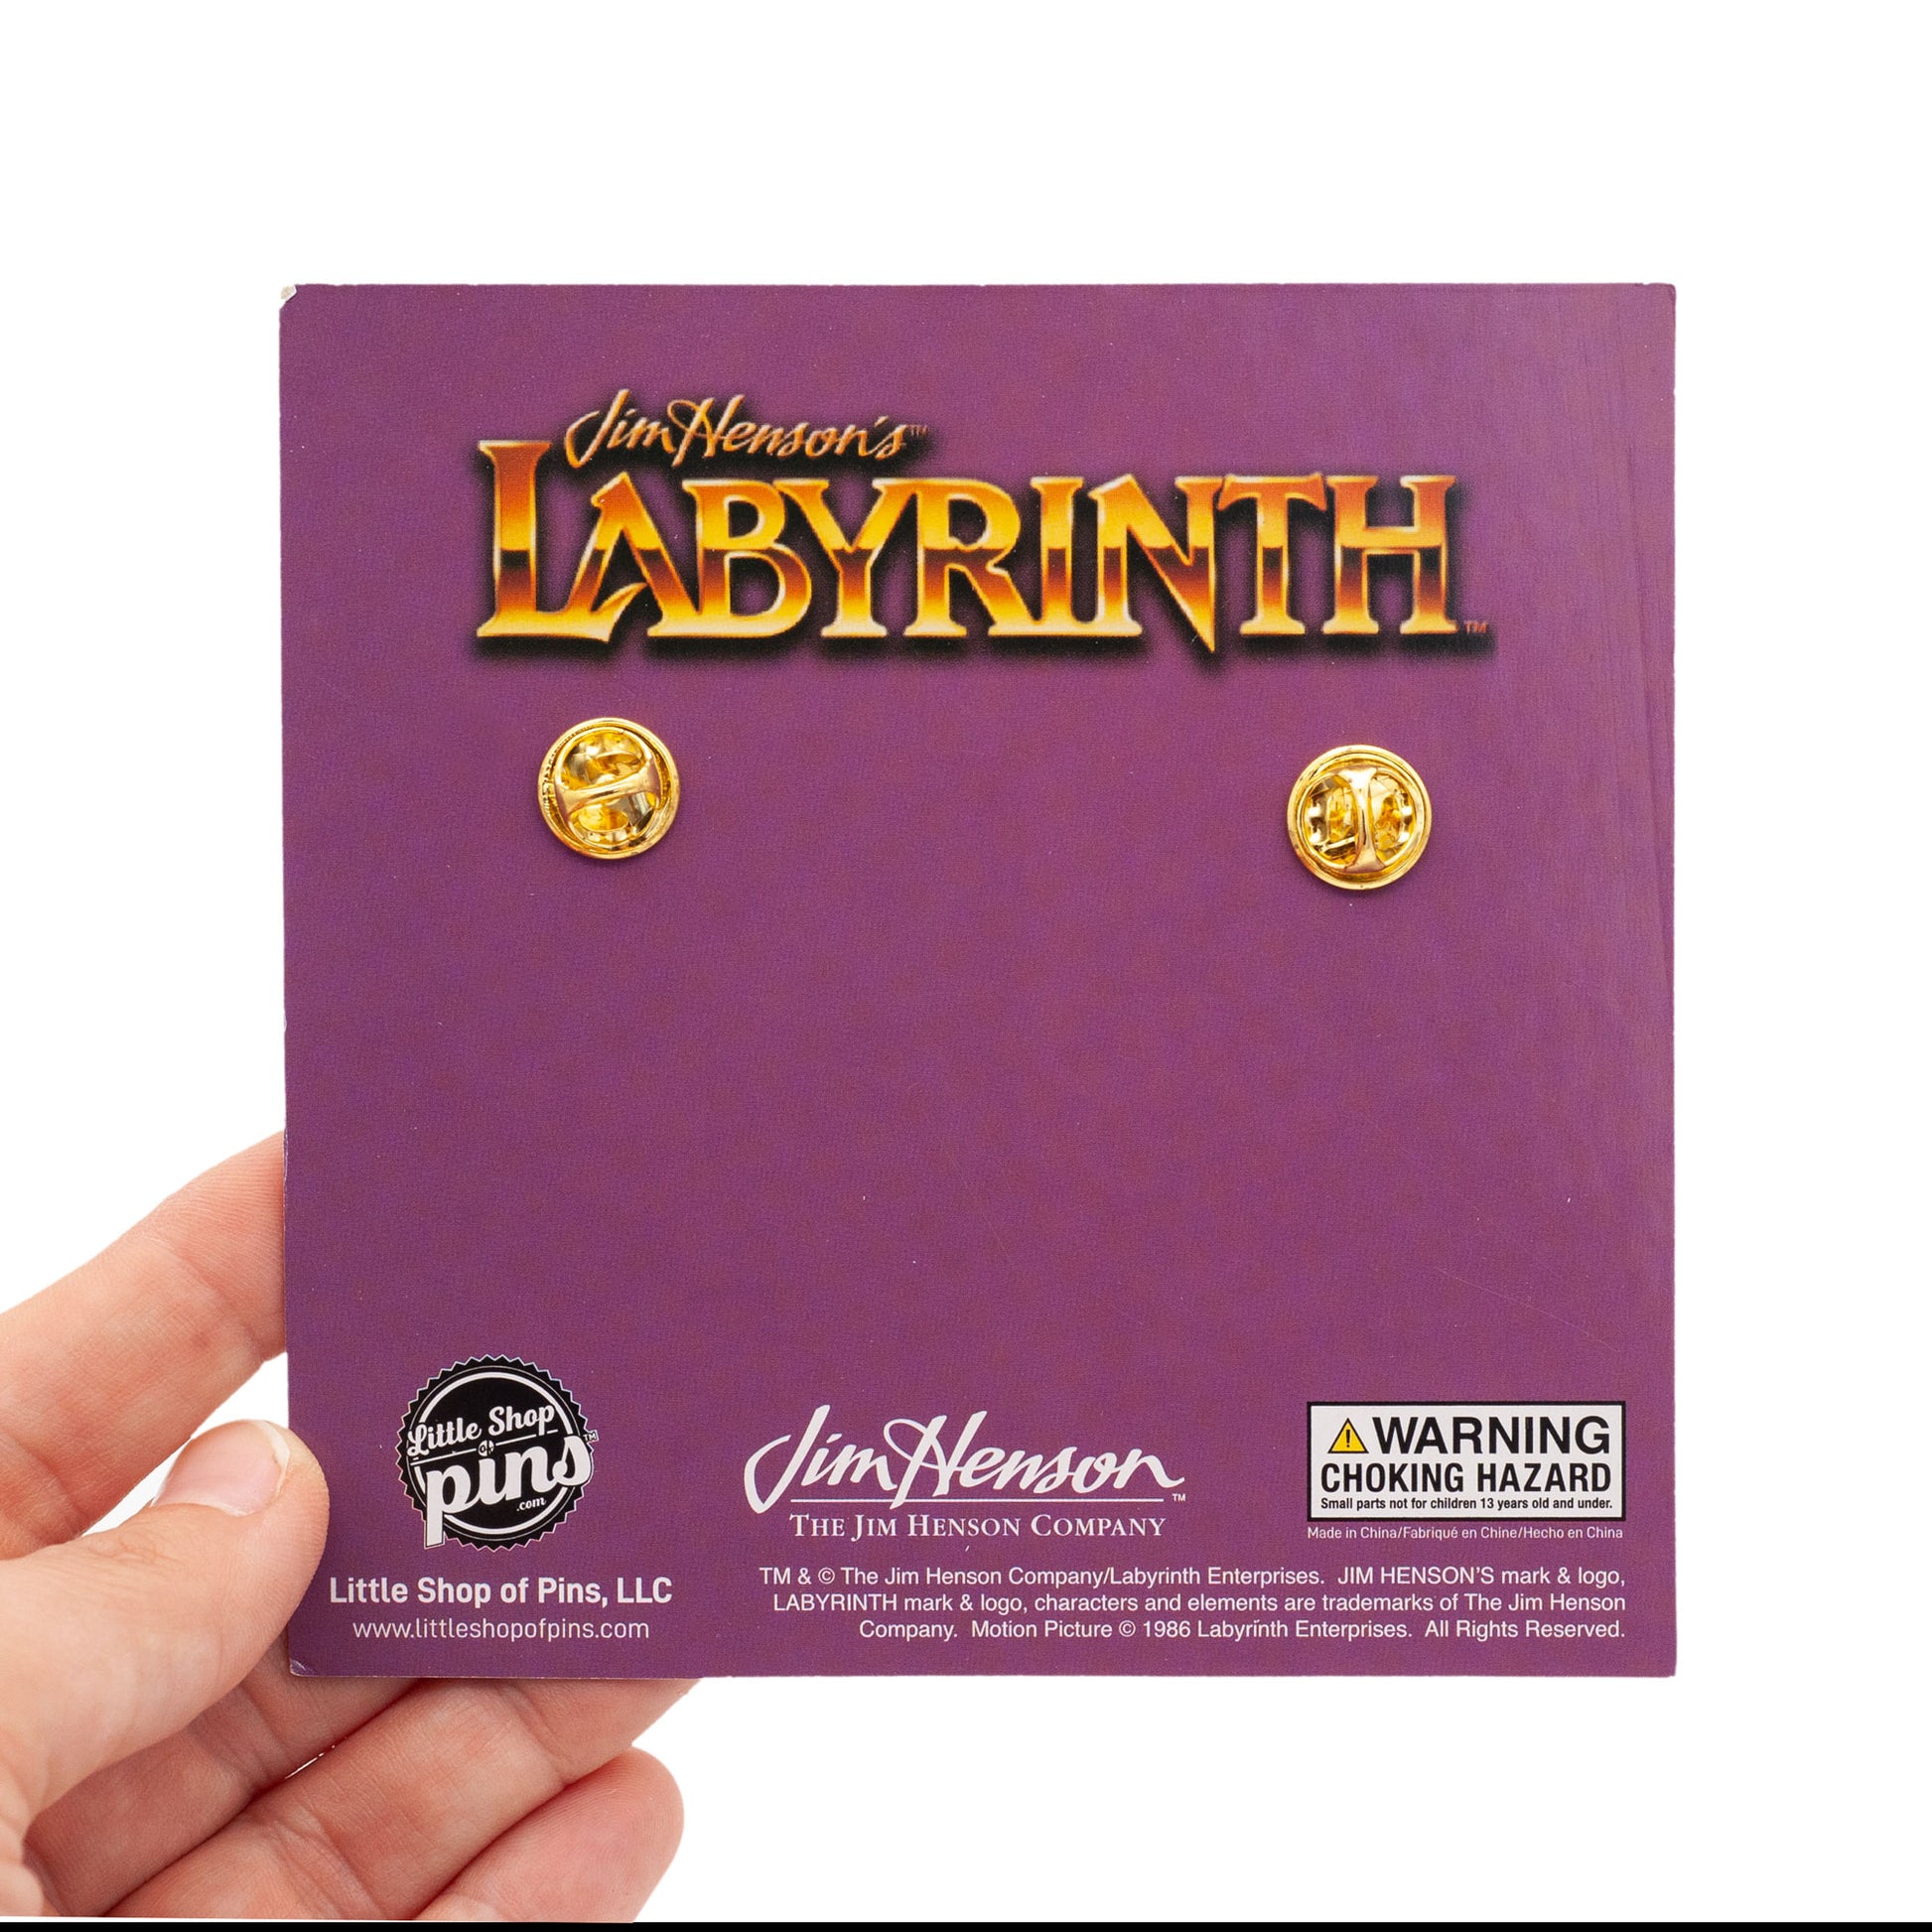 back of the labyrinth backing card with legal.